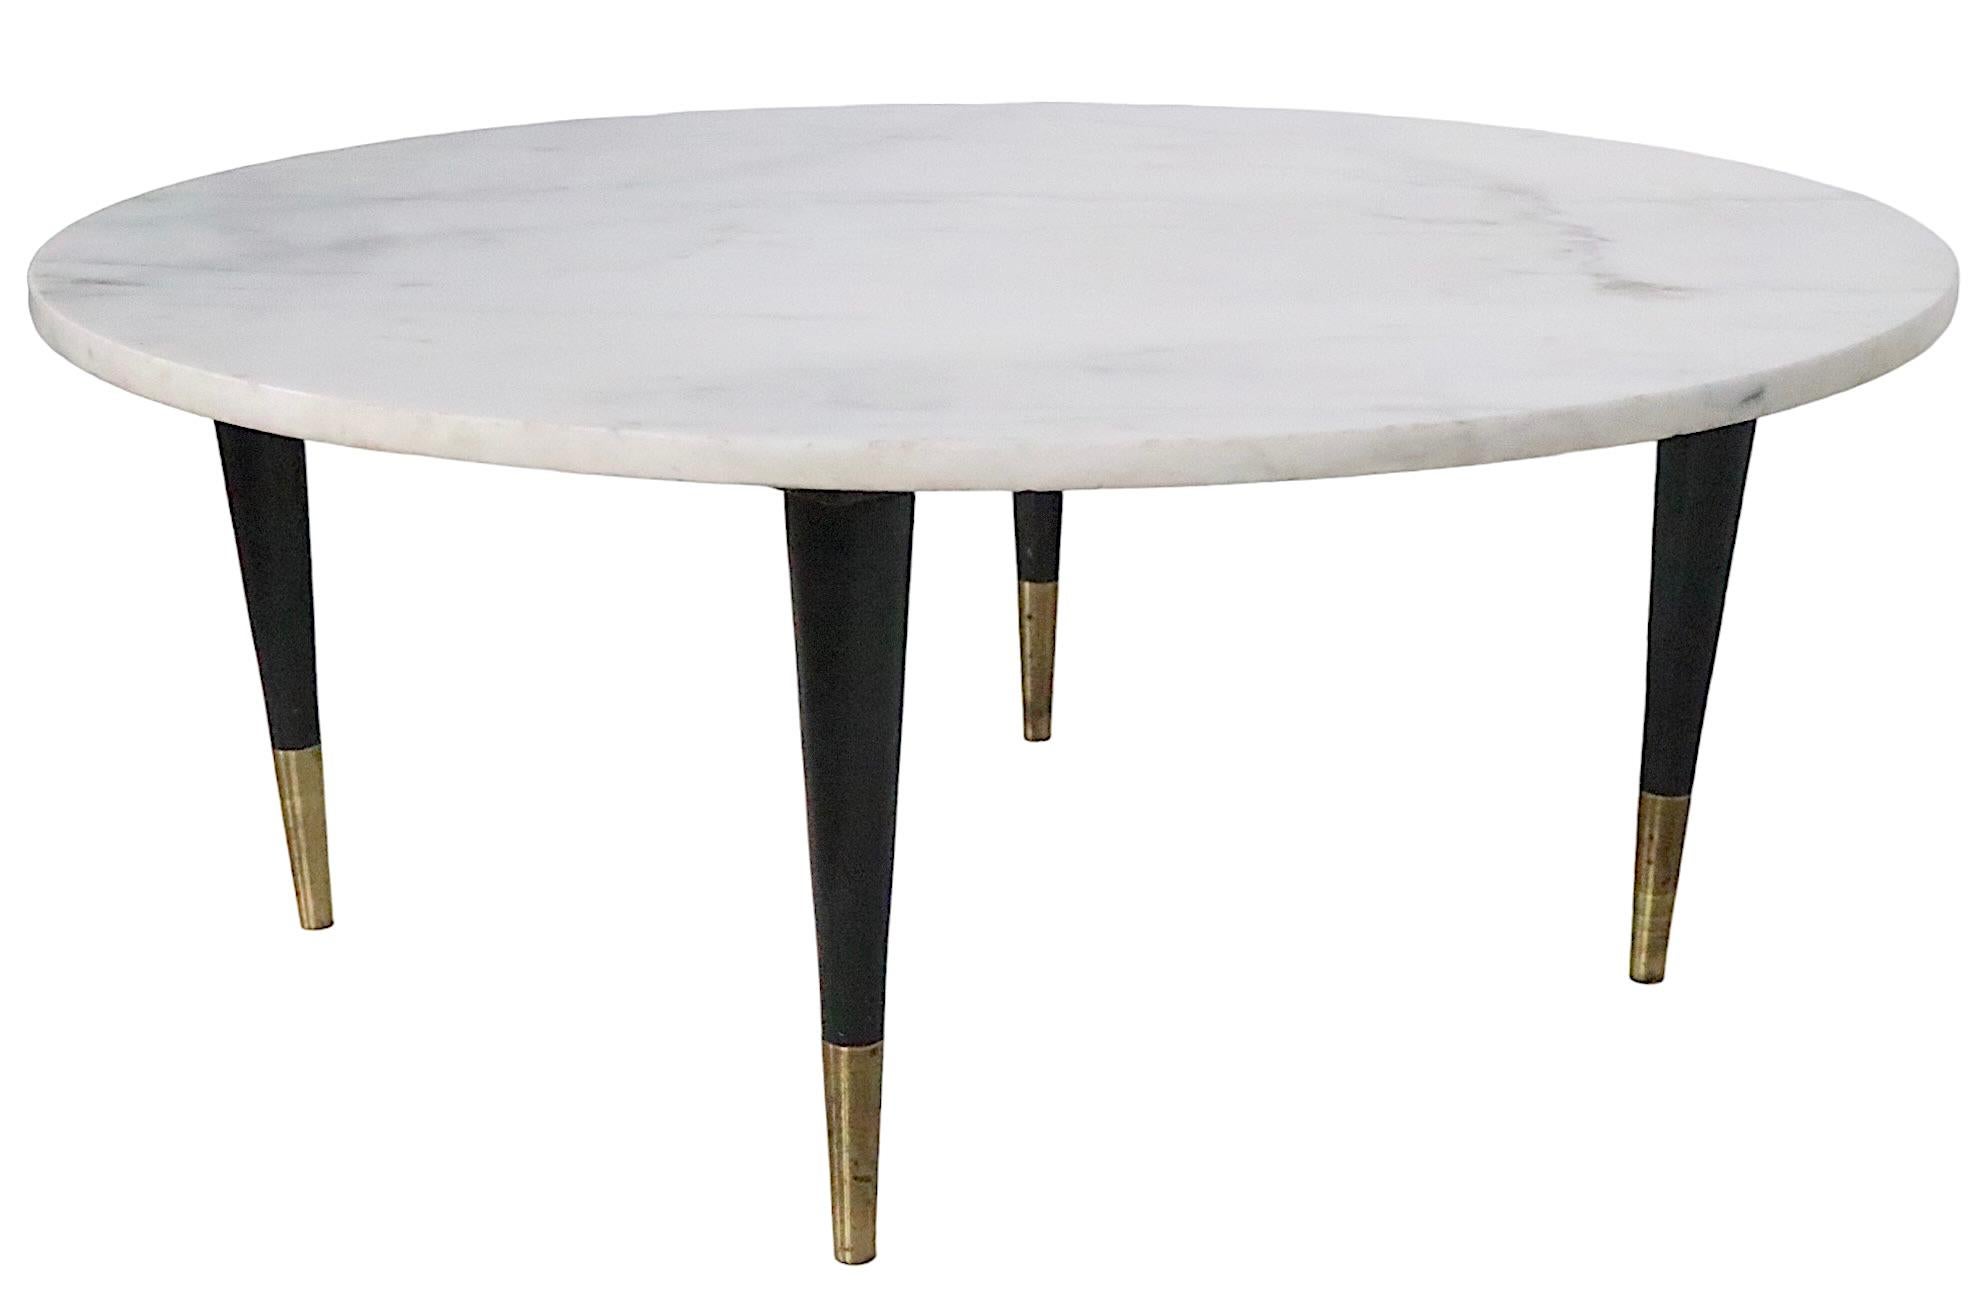 American Black and White Mid Century Marble Top Coffee Cocktail Table, circa 1950/1960s For Sale